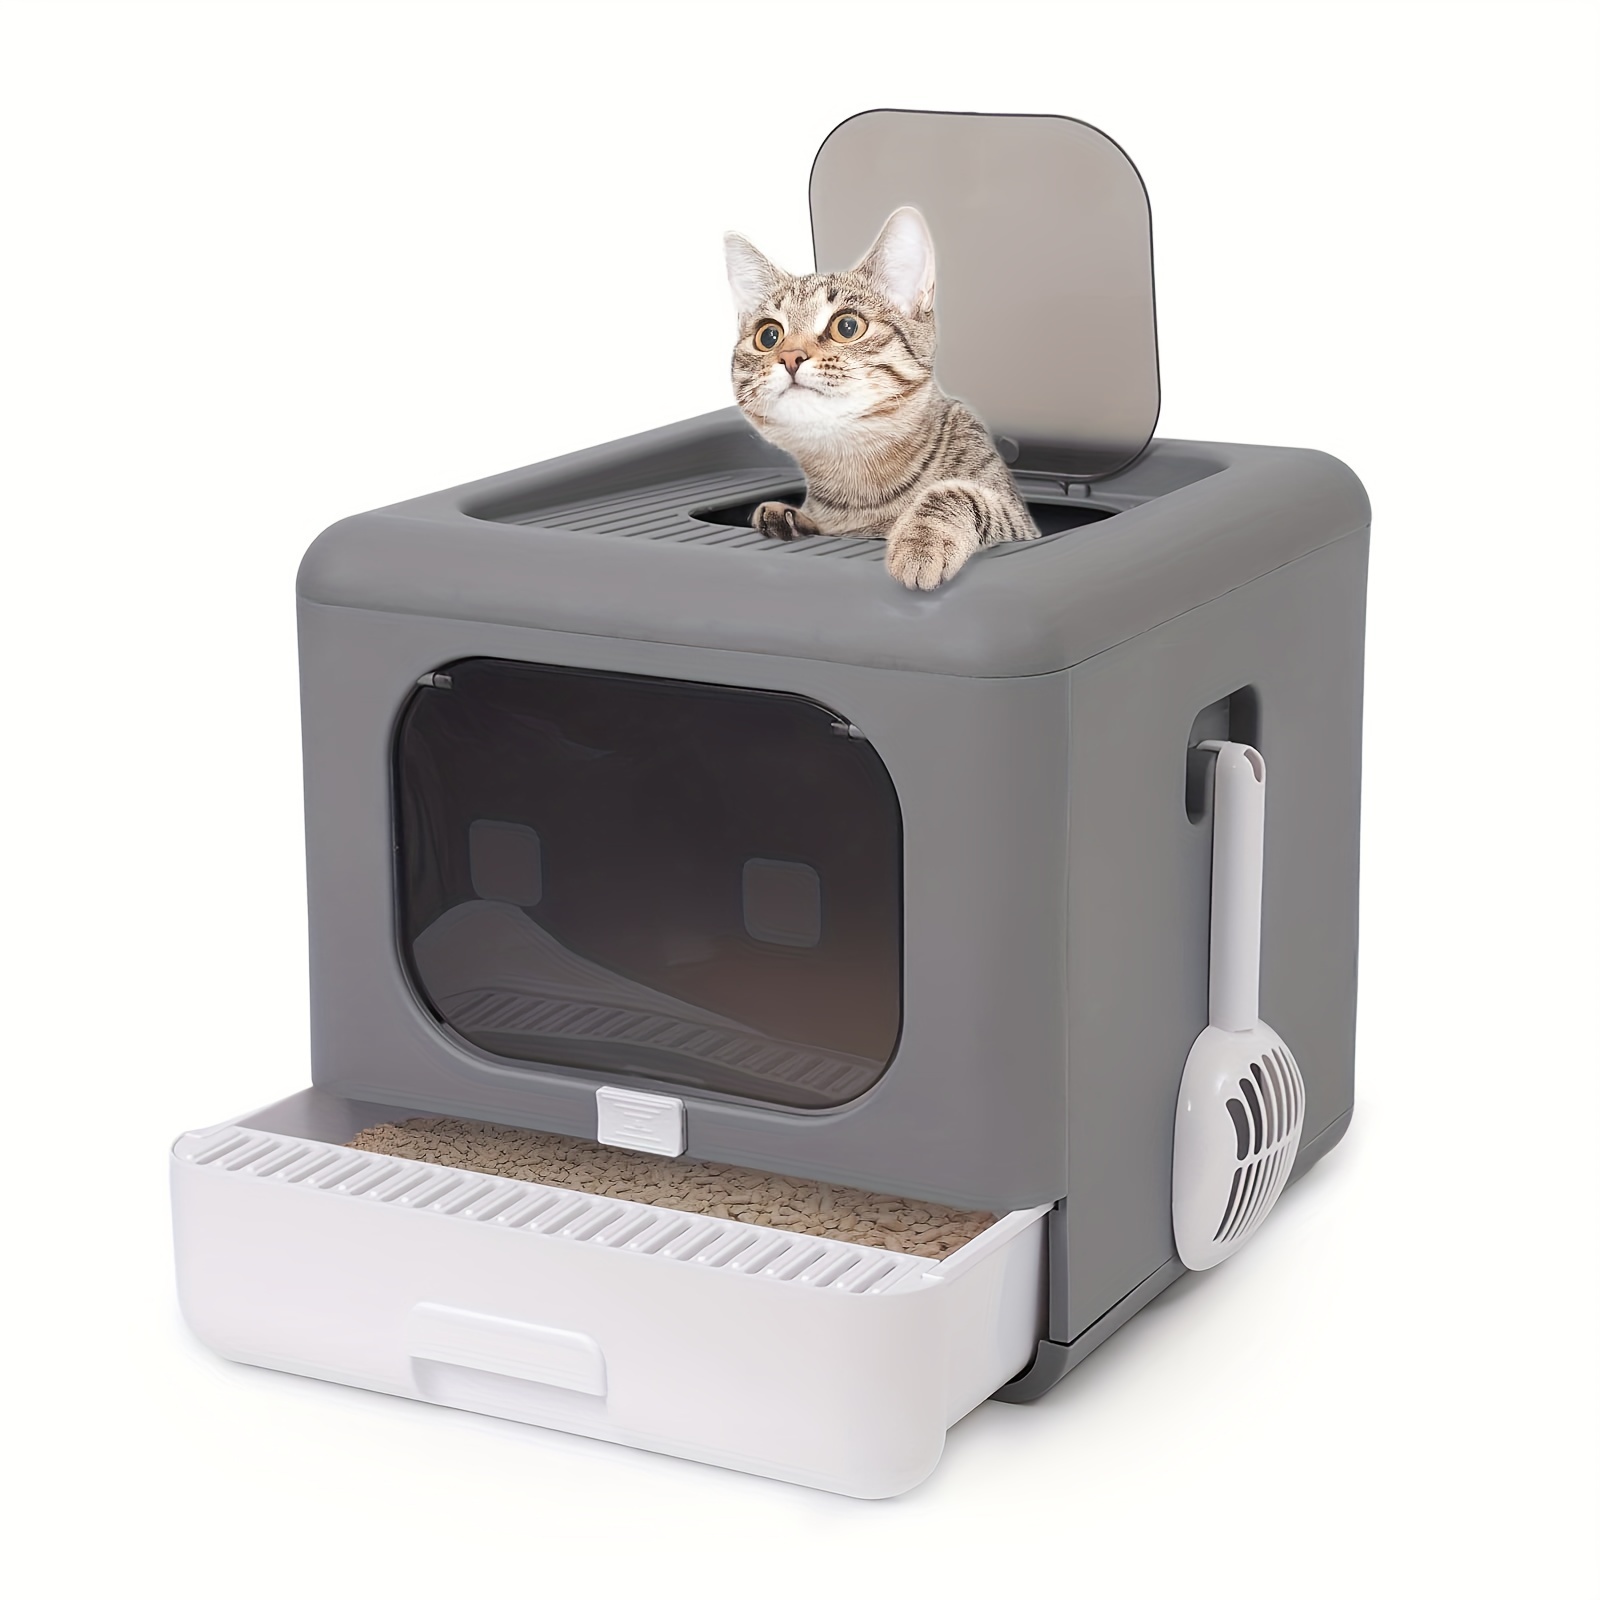 

Foldable Enclosed Cat Litter Box, Cat Potty With Front Door & Top Entry, Pull-out Drawer Type, Cat Toilet With Lid, Easy Cleaning And Anti-splashing Cat Litter Tray With Plastic Scoop (grey)